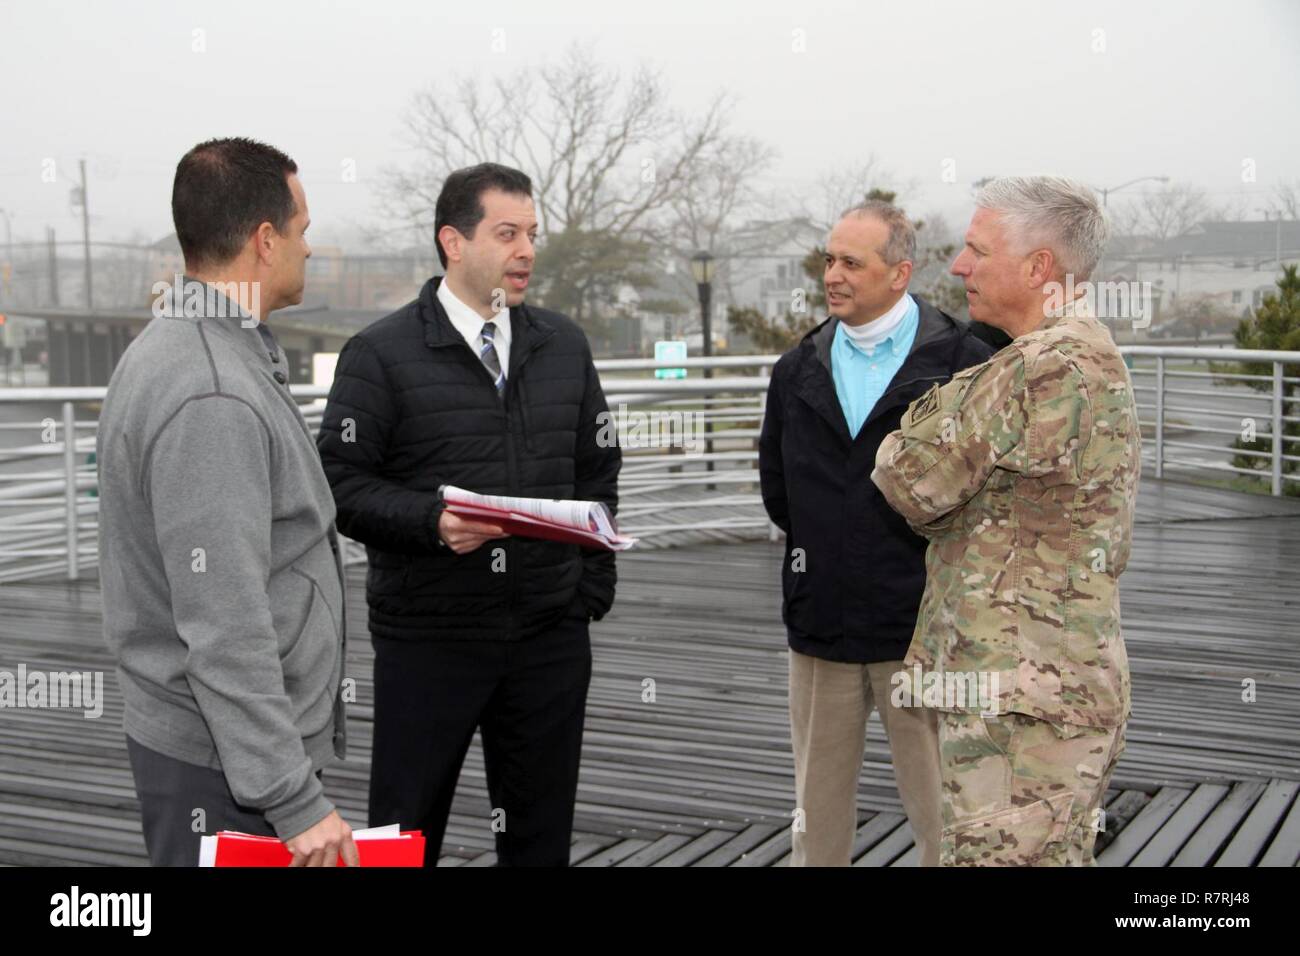 Frank Verga, New York District, U.S. Army Corps of Engineers (second from left), briefs U.S. Army Corps of Engineers Deputy Commanding General Maj. Gen. Rick Stevens (right) on April 4, 2017, describing details about Hurricane Sandy coastal storm risk management work planned for south Staten Island, assisted by Anthony Ciorra (left), also of the New York District. Staten Island, a borough of New York City, suffered significant loss of life and property damage due to Hurricane Sandy's storm surge. Joe Forcina, Chief of the North Atlantic Division's Sandy Coastal Management Division (second from Stock Photo